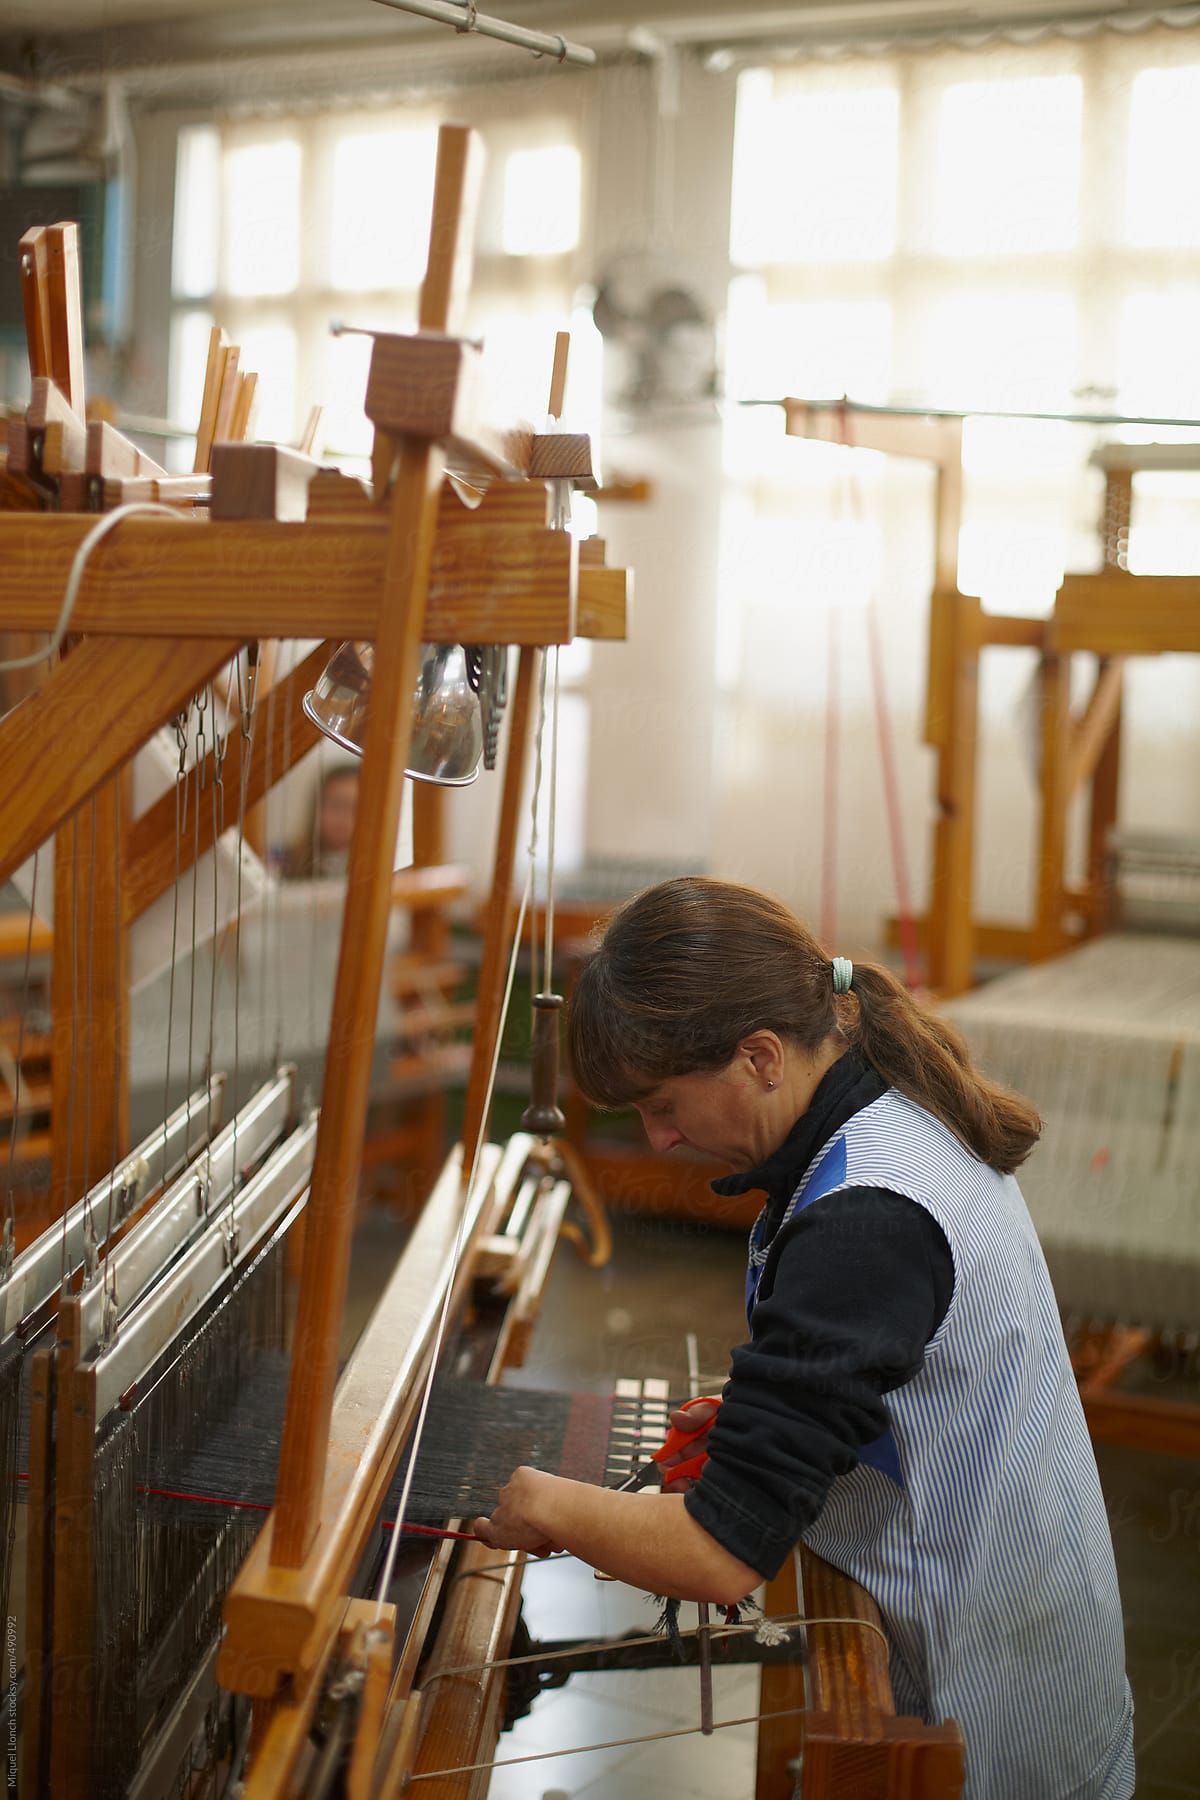 Woman weaver working with an artisanal loom in a workshop